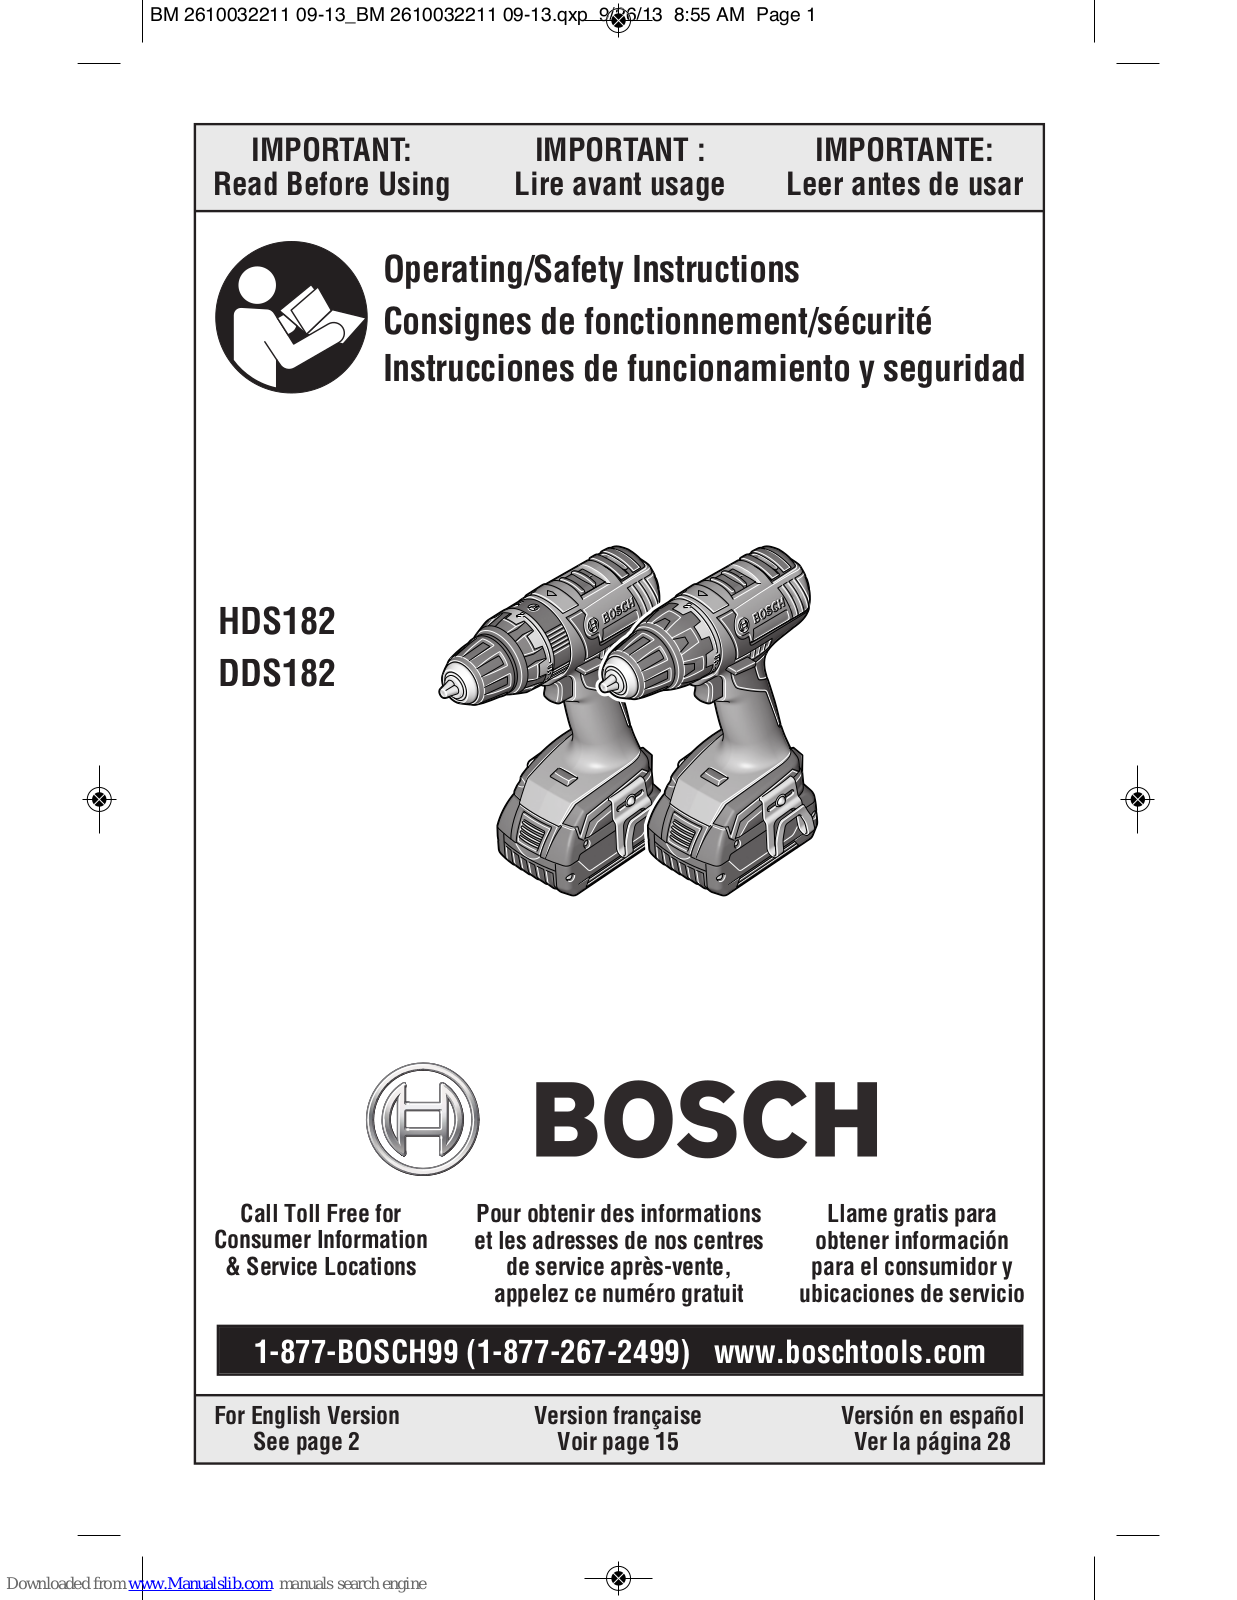 Bosch HDS182, DDS182, HDS181, DDS181, ADS181 Operating/safety Instructions Manual